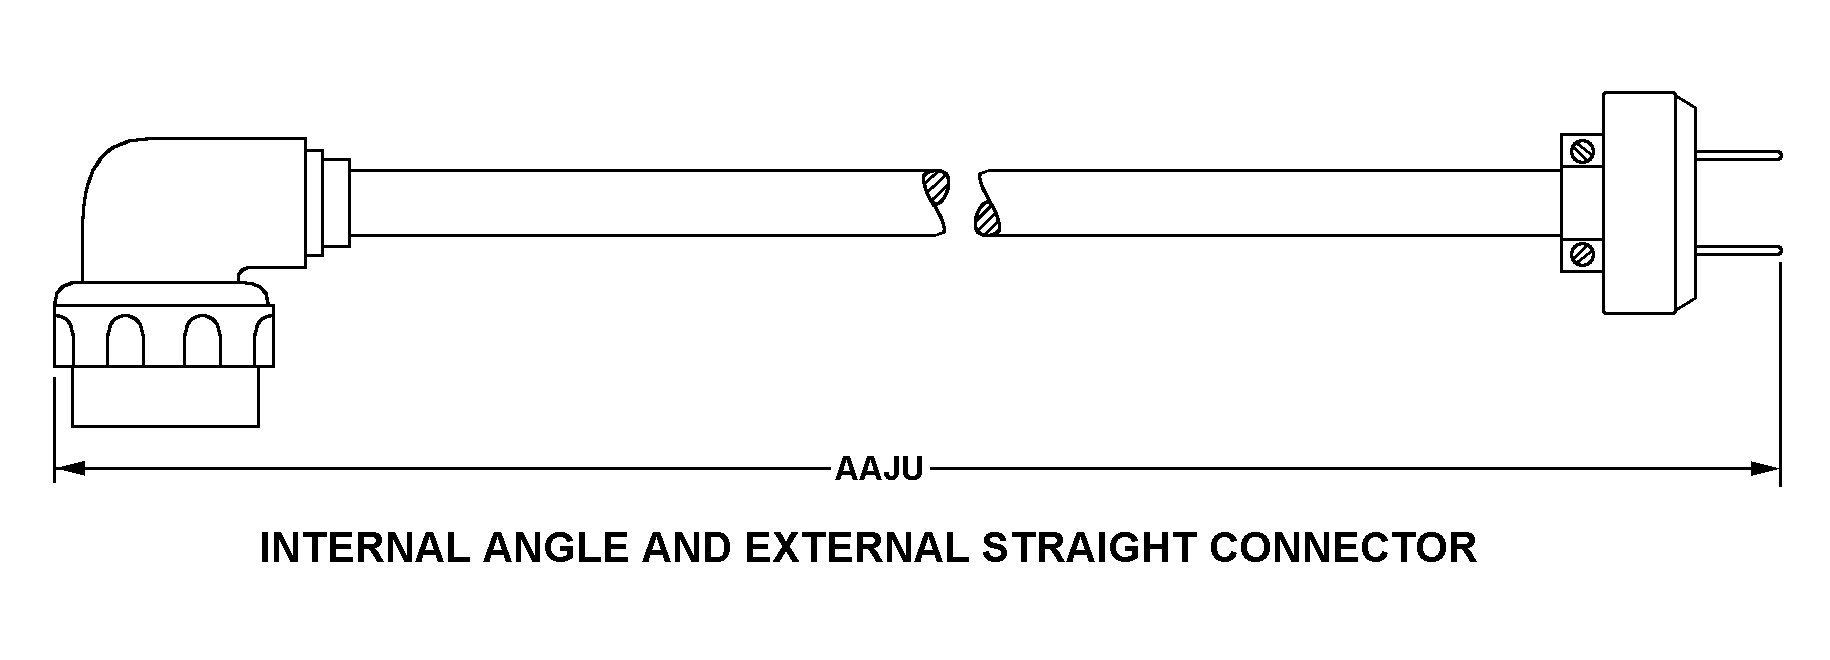 INTERNAL ANGLE AND EXTERNAL STRAIGHT CONNECTOR style nsn 5995-01-208-2993